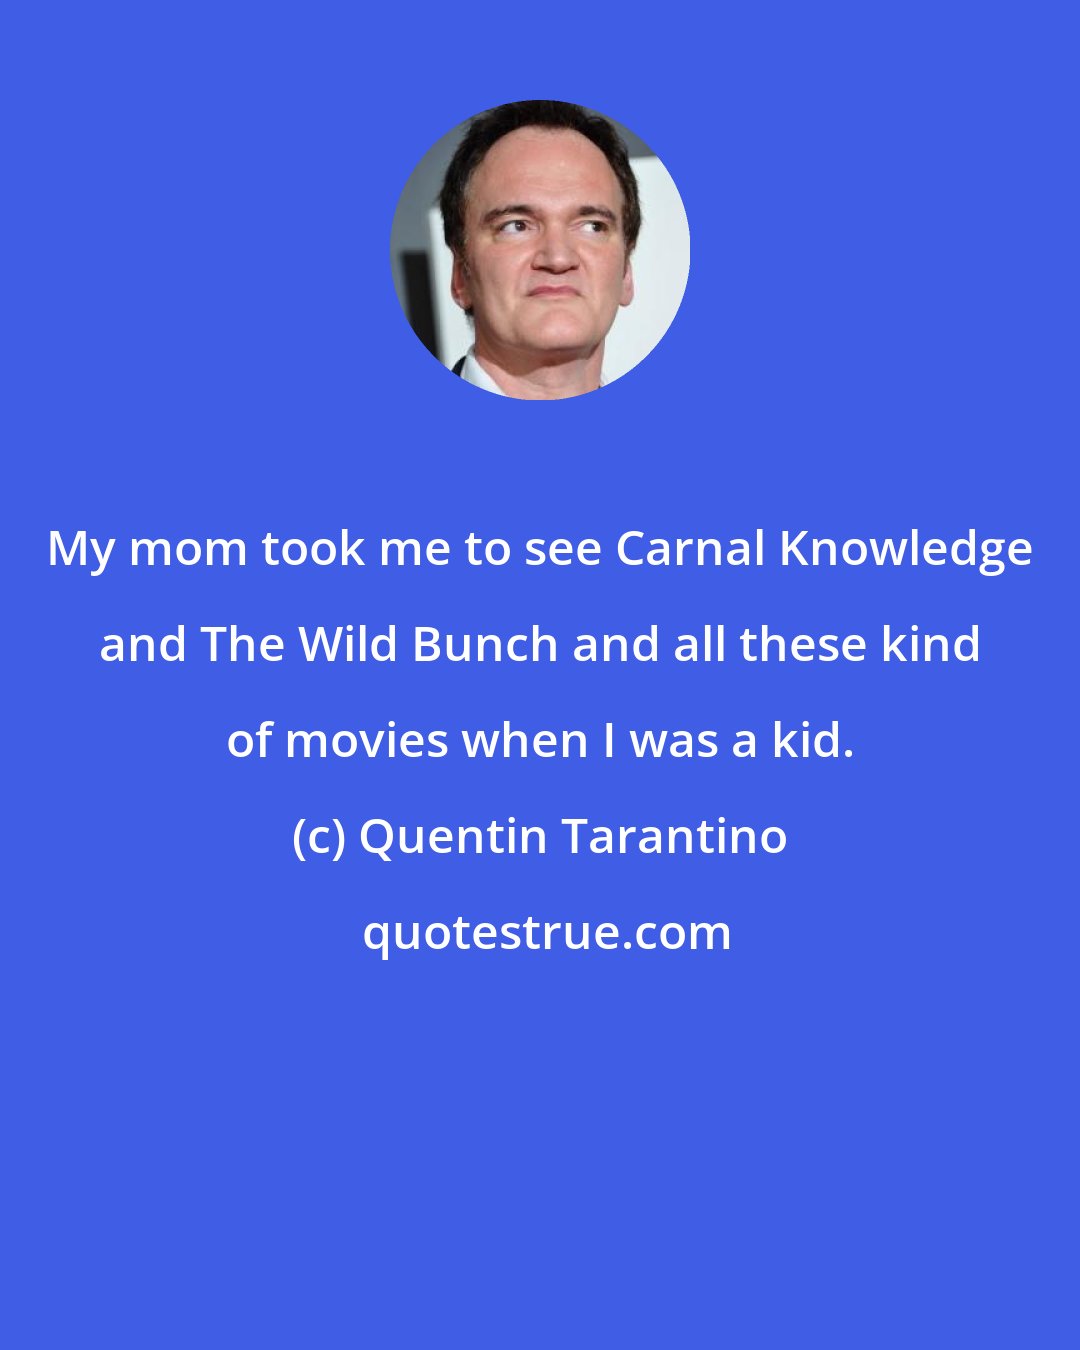 Quentin Tarantino: My mom took me to see Carnal Knowledge and The Wild Bunch and all these kind of movies when I was a kid.